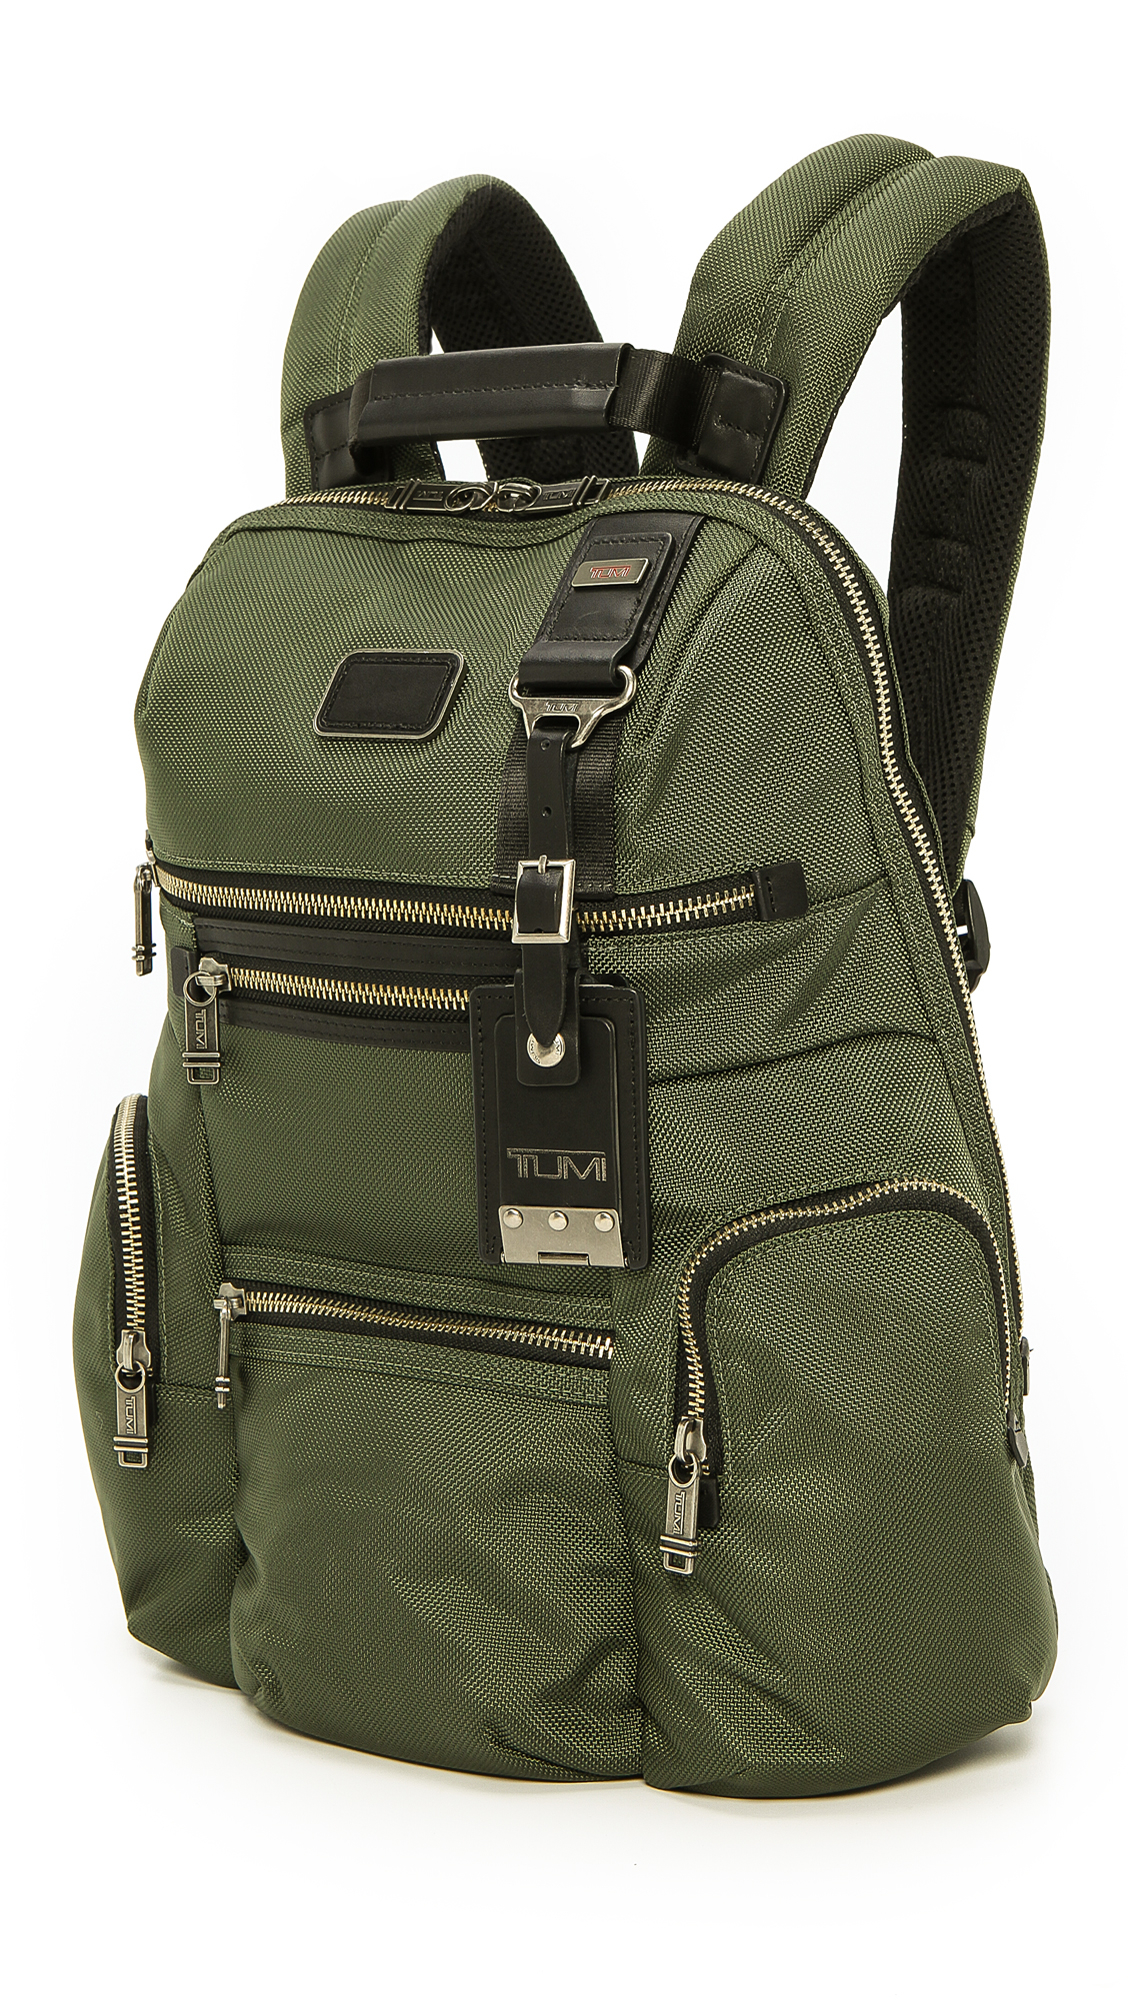 Lyst - Tumi Alpha Bravo Knox Backpack in Green for Men